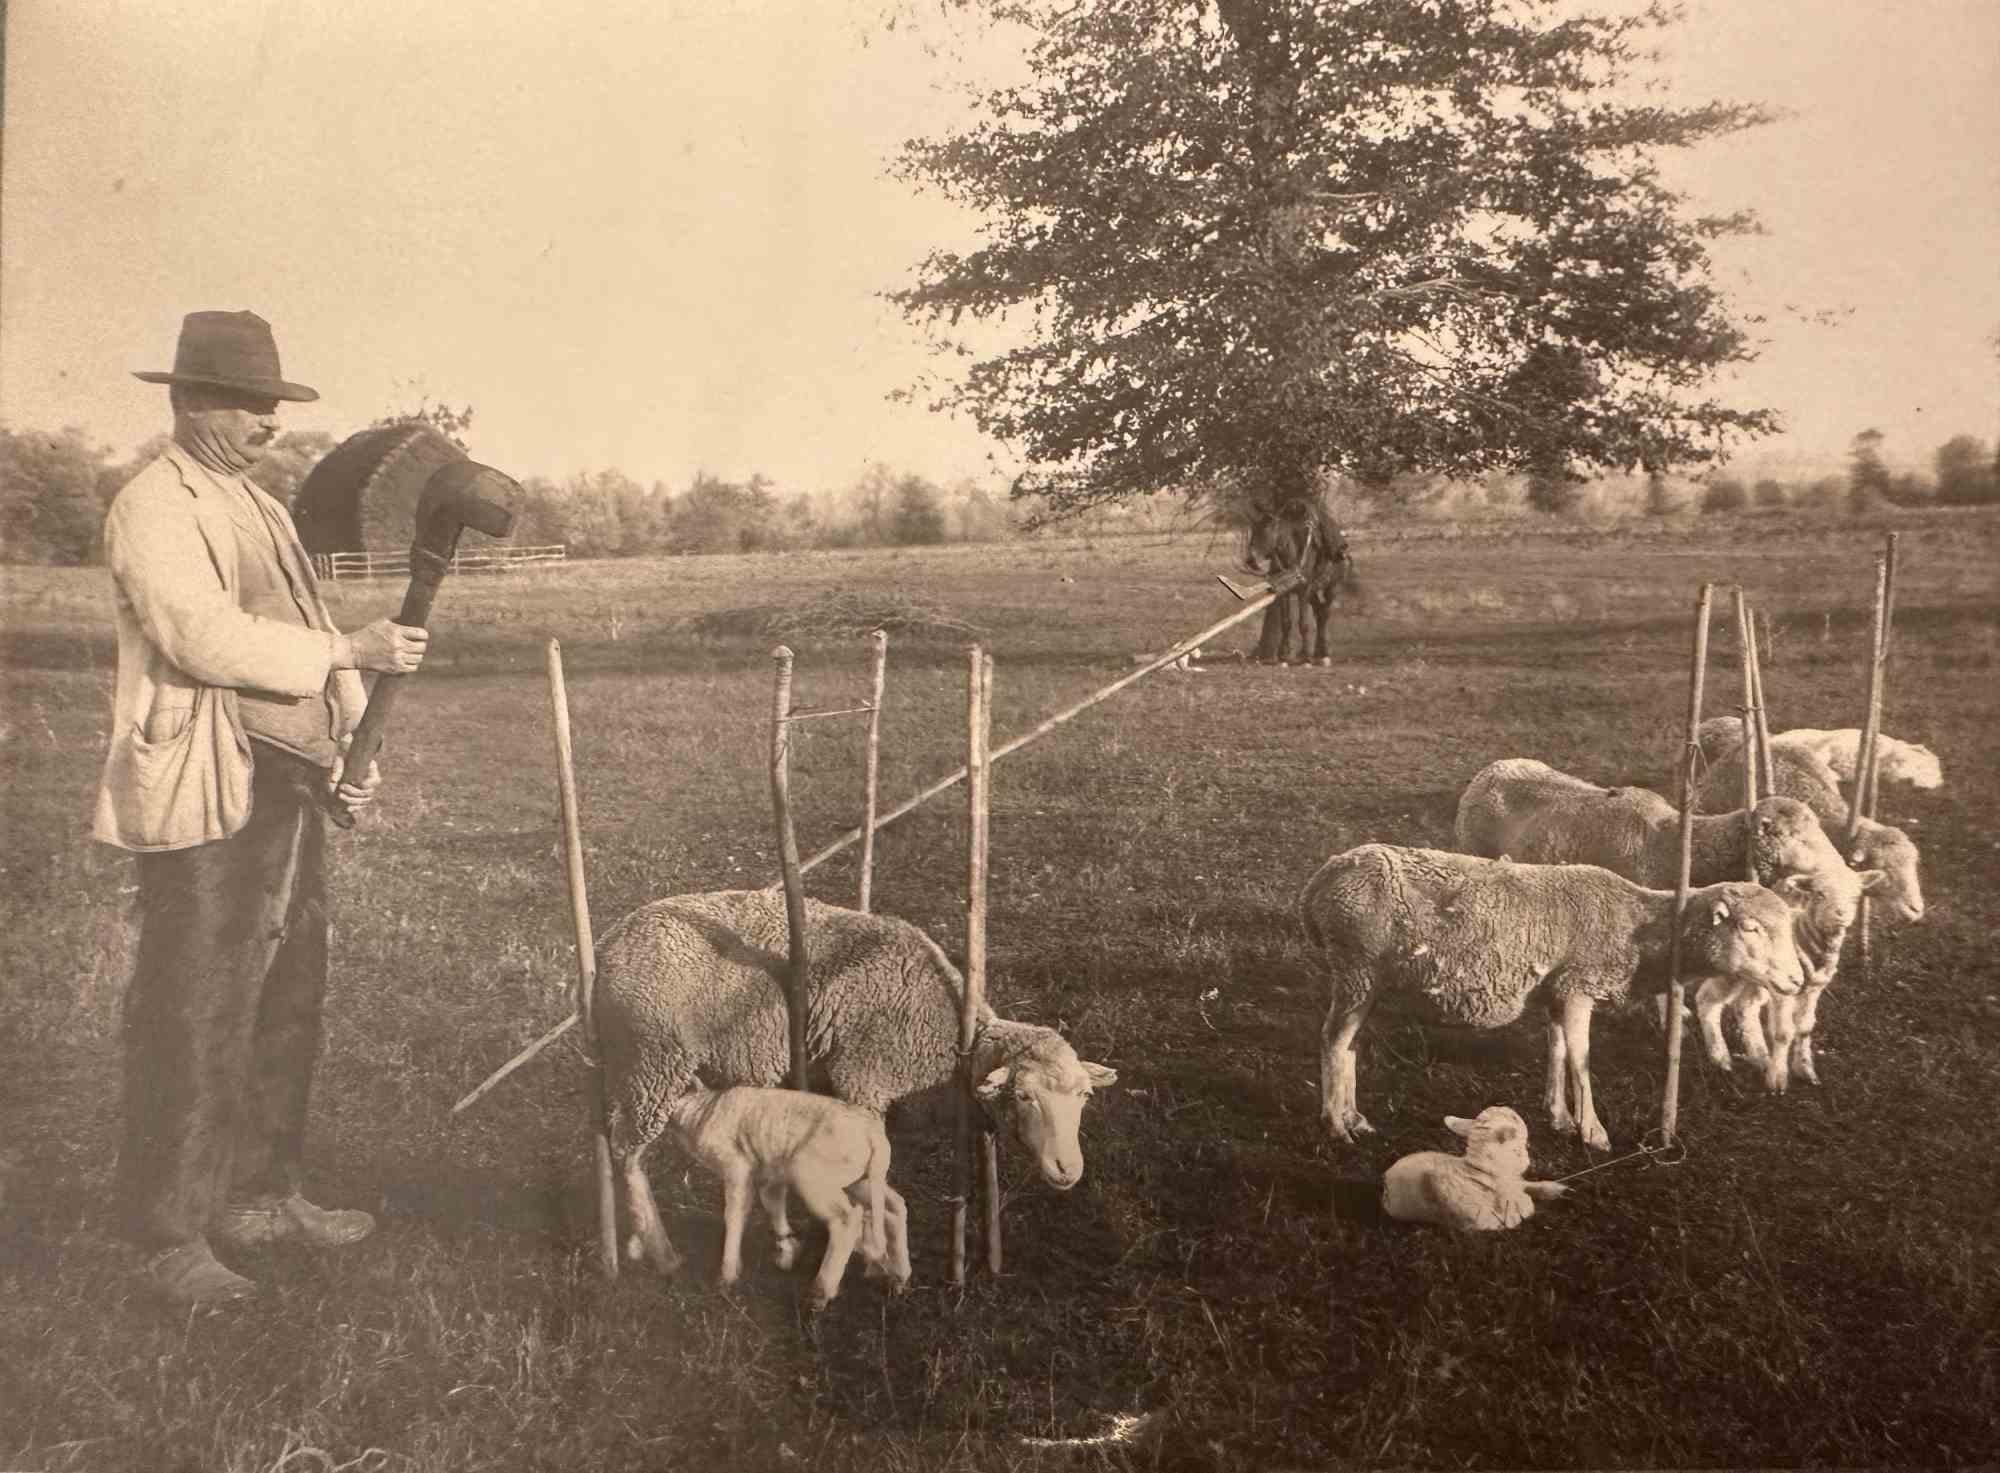 Unknown Figurative Photograph - The Old Days - Herds in the Maremma (Tuscany) - Early 20th Century